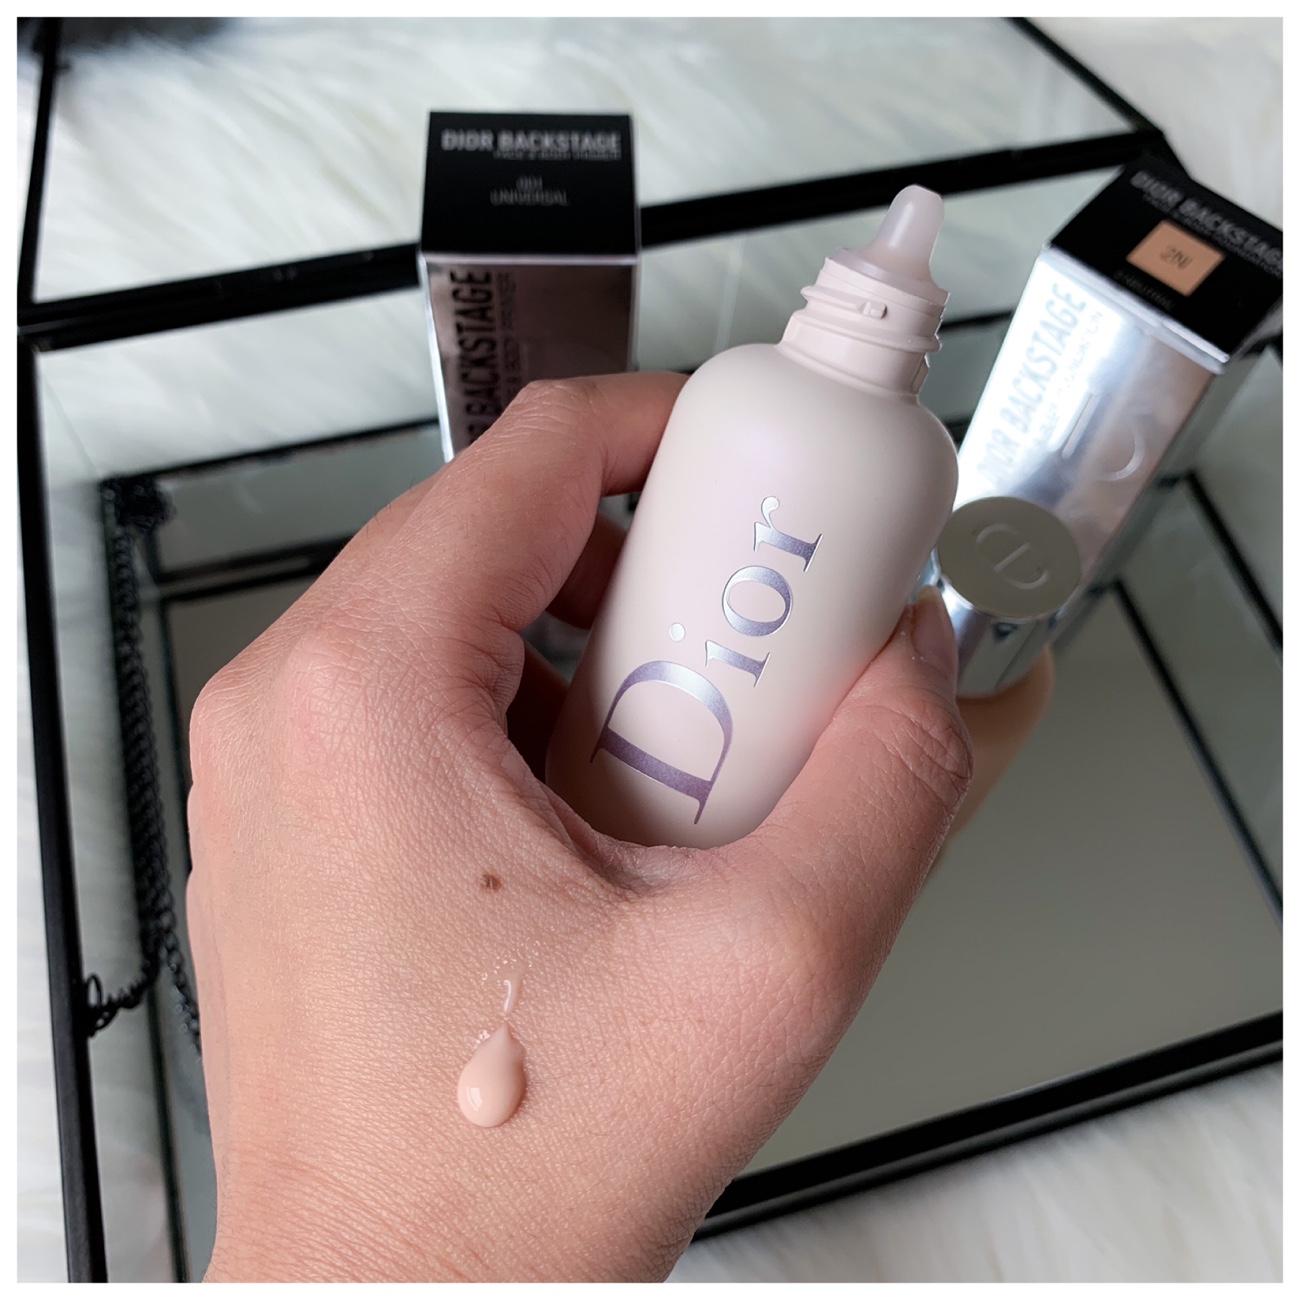 face and body primer dior